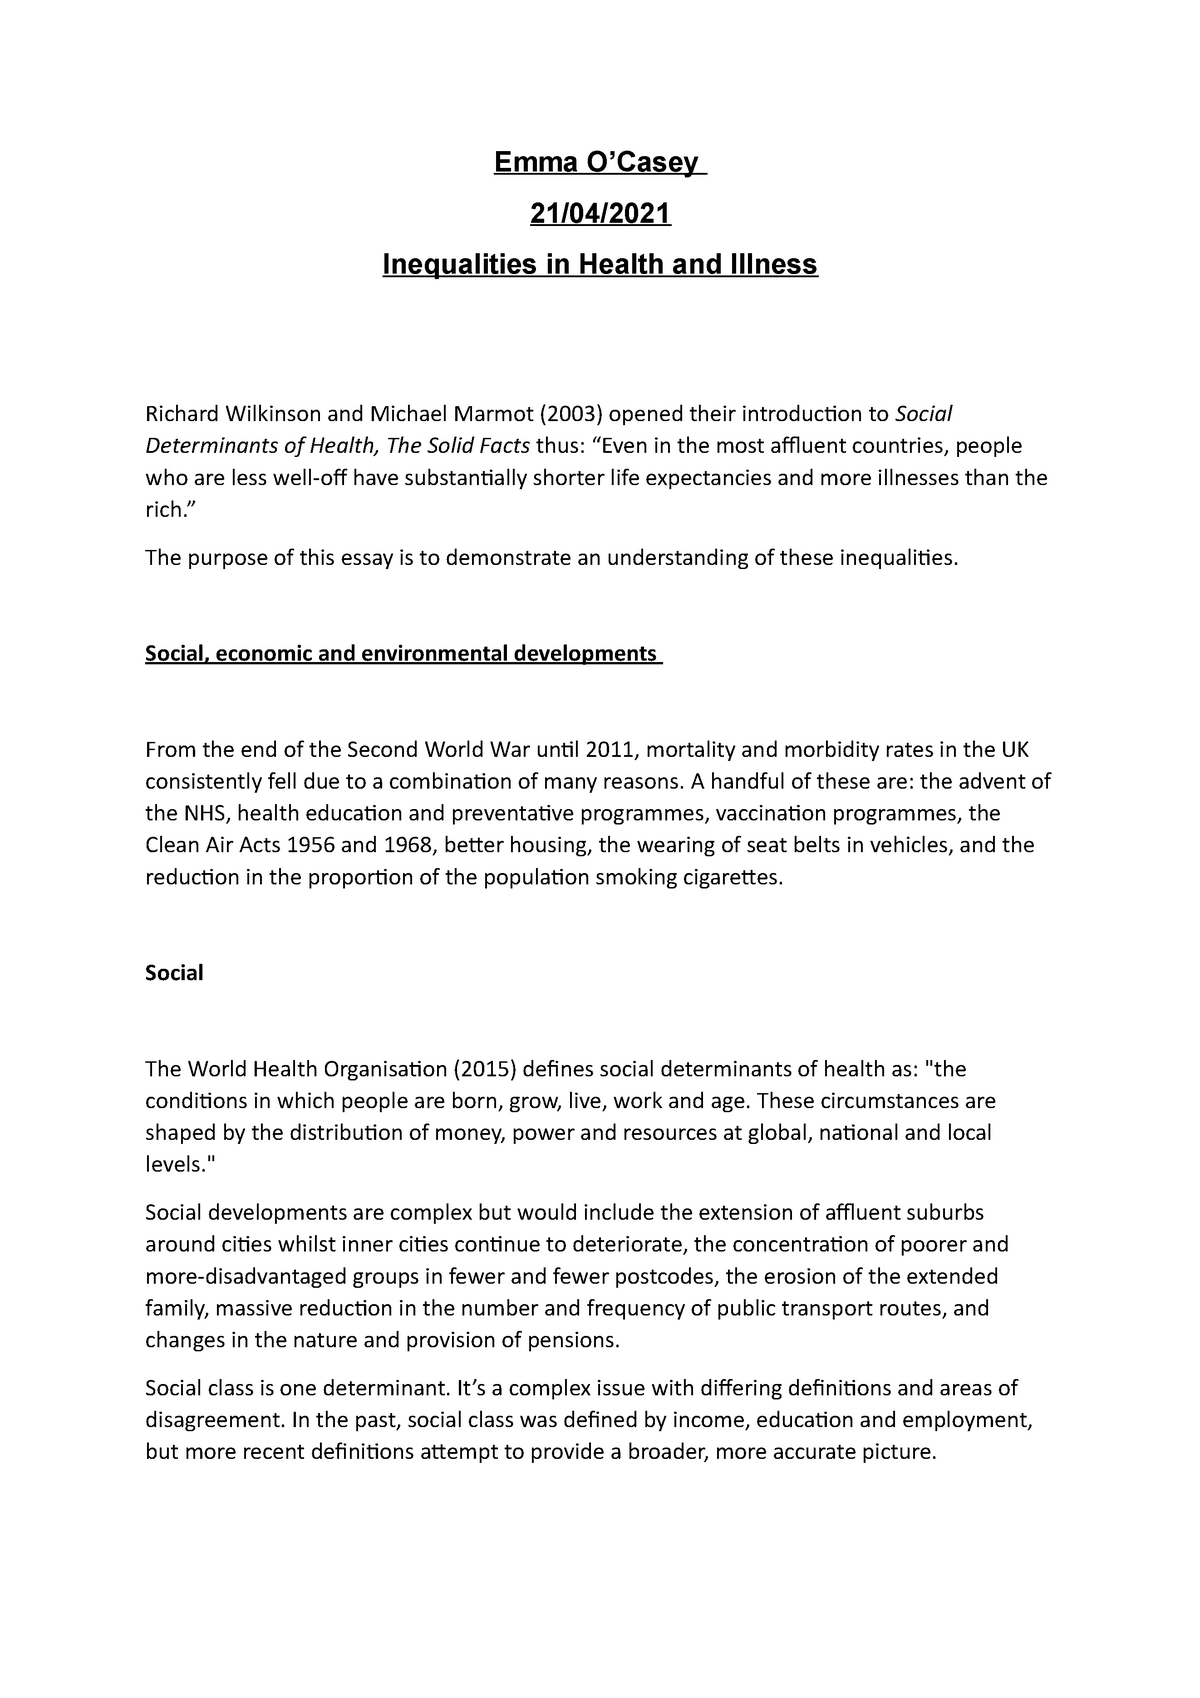 social class and health inequalities essays